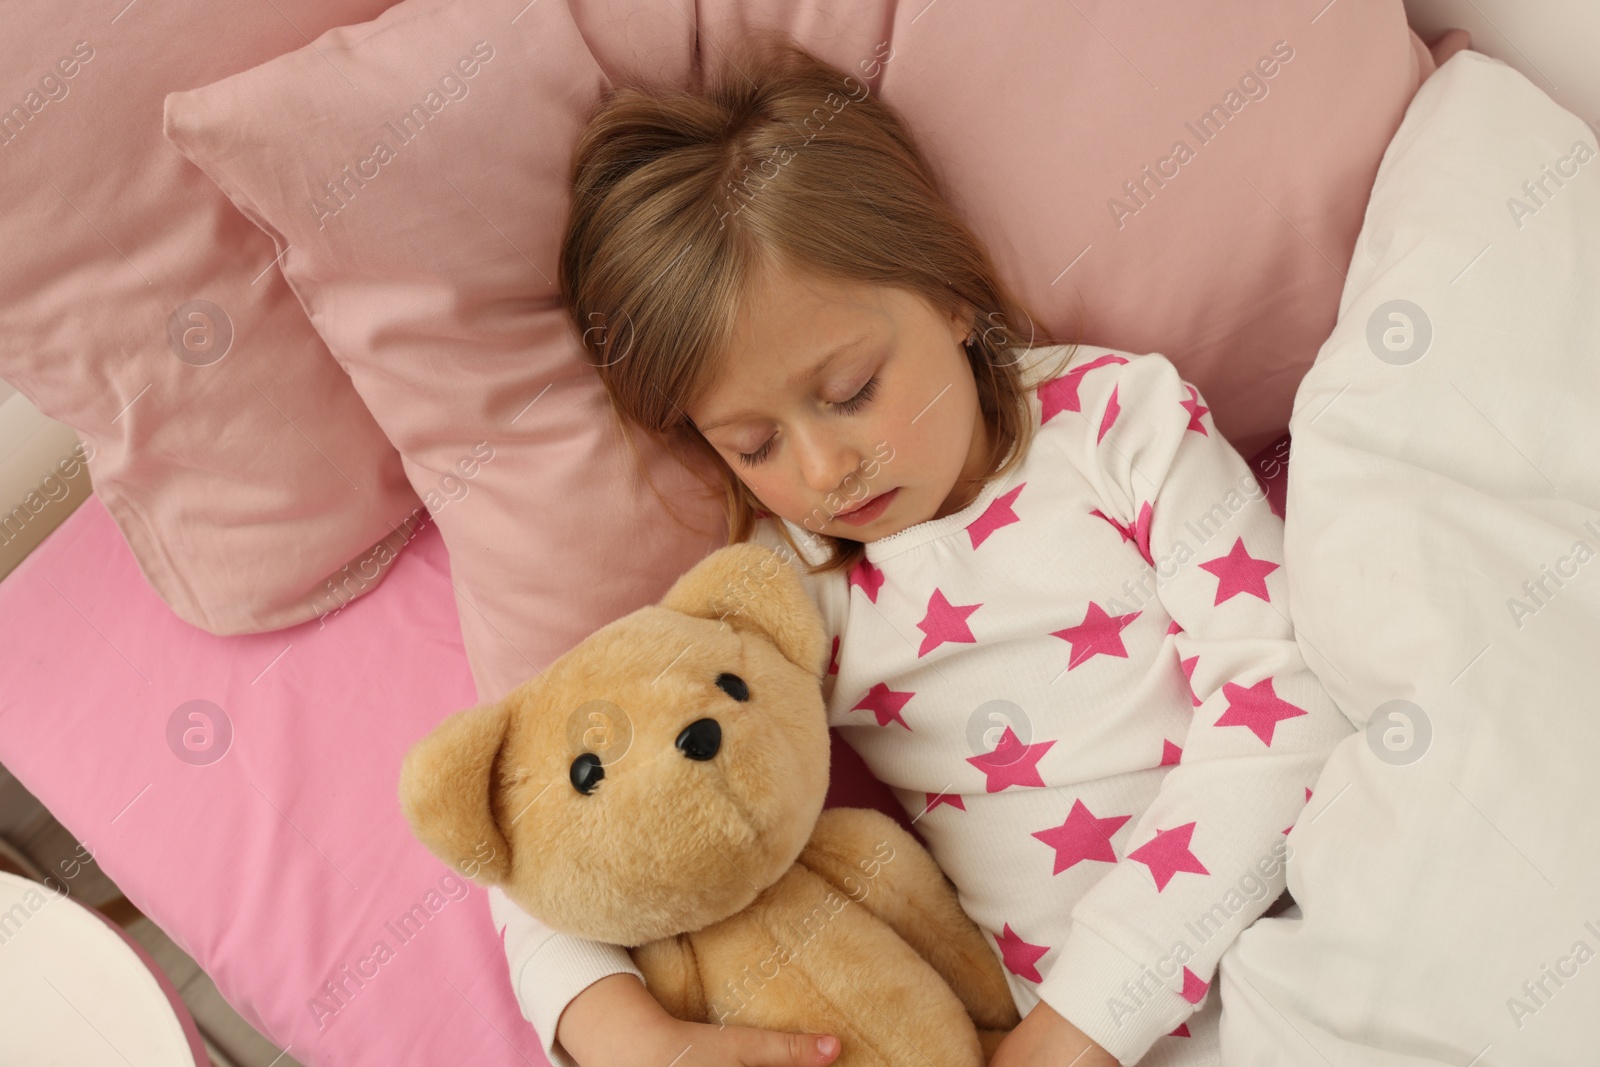 Photo of Little girl snoring while sleeping in bed, above view